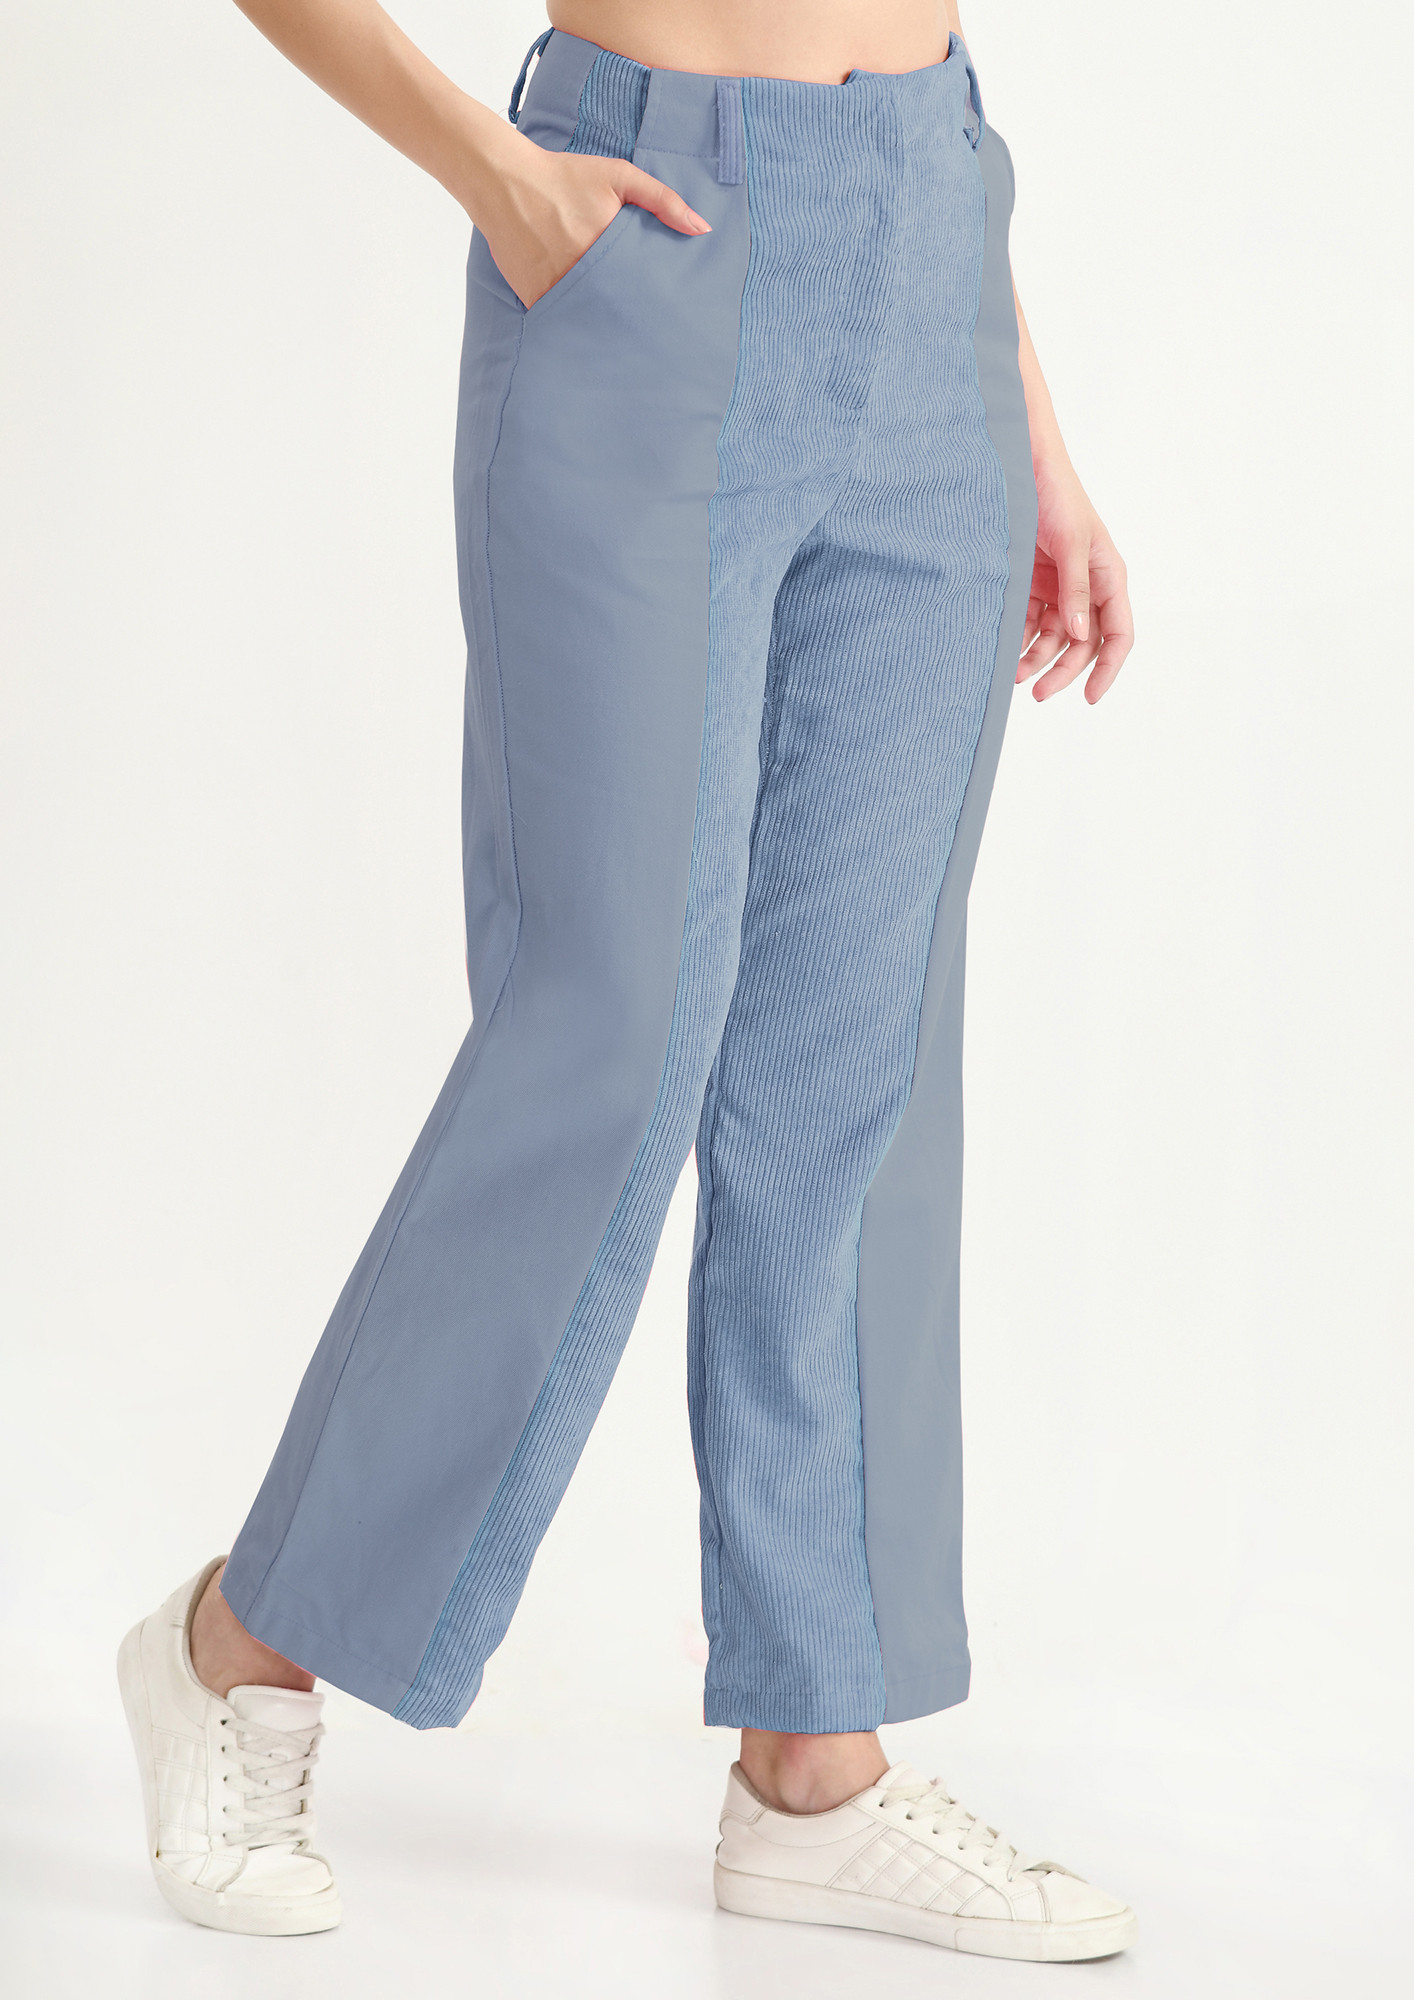 Two Tone Jeans-Blue